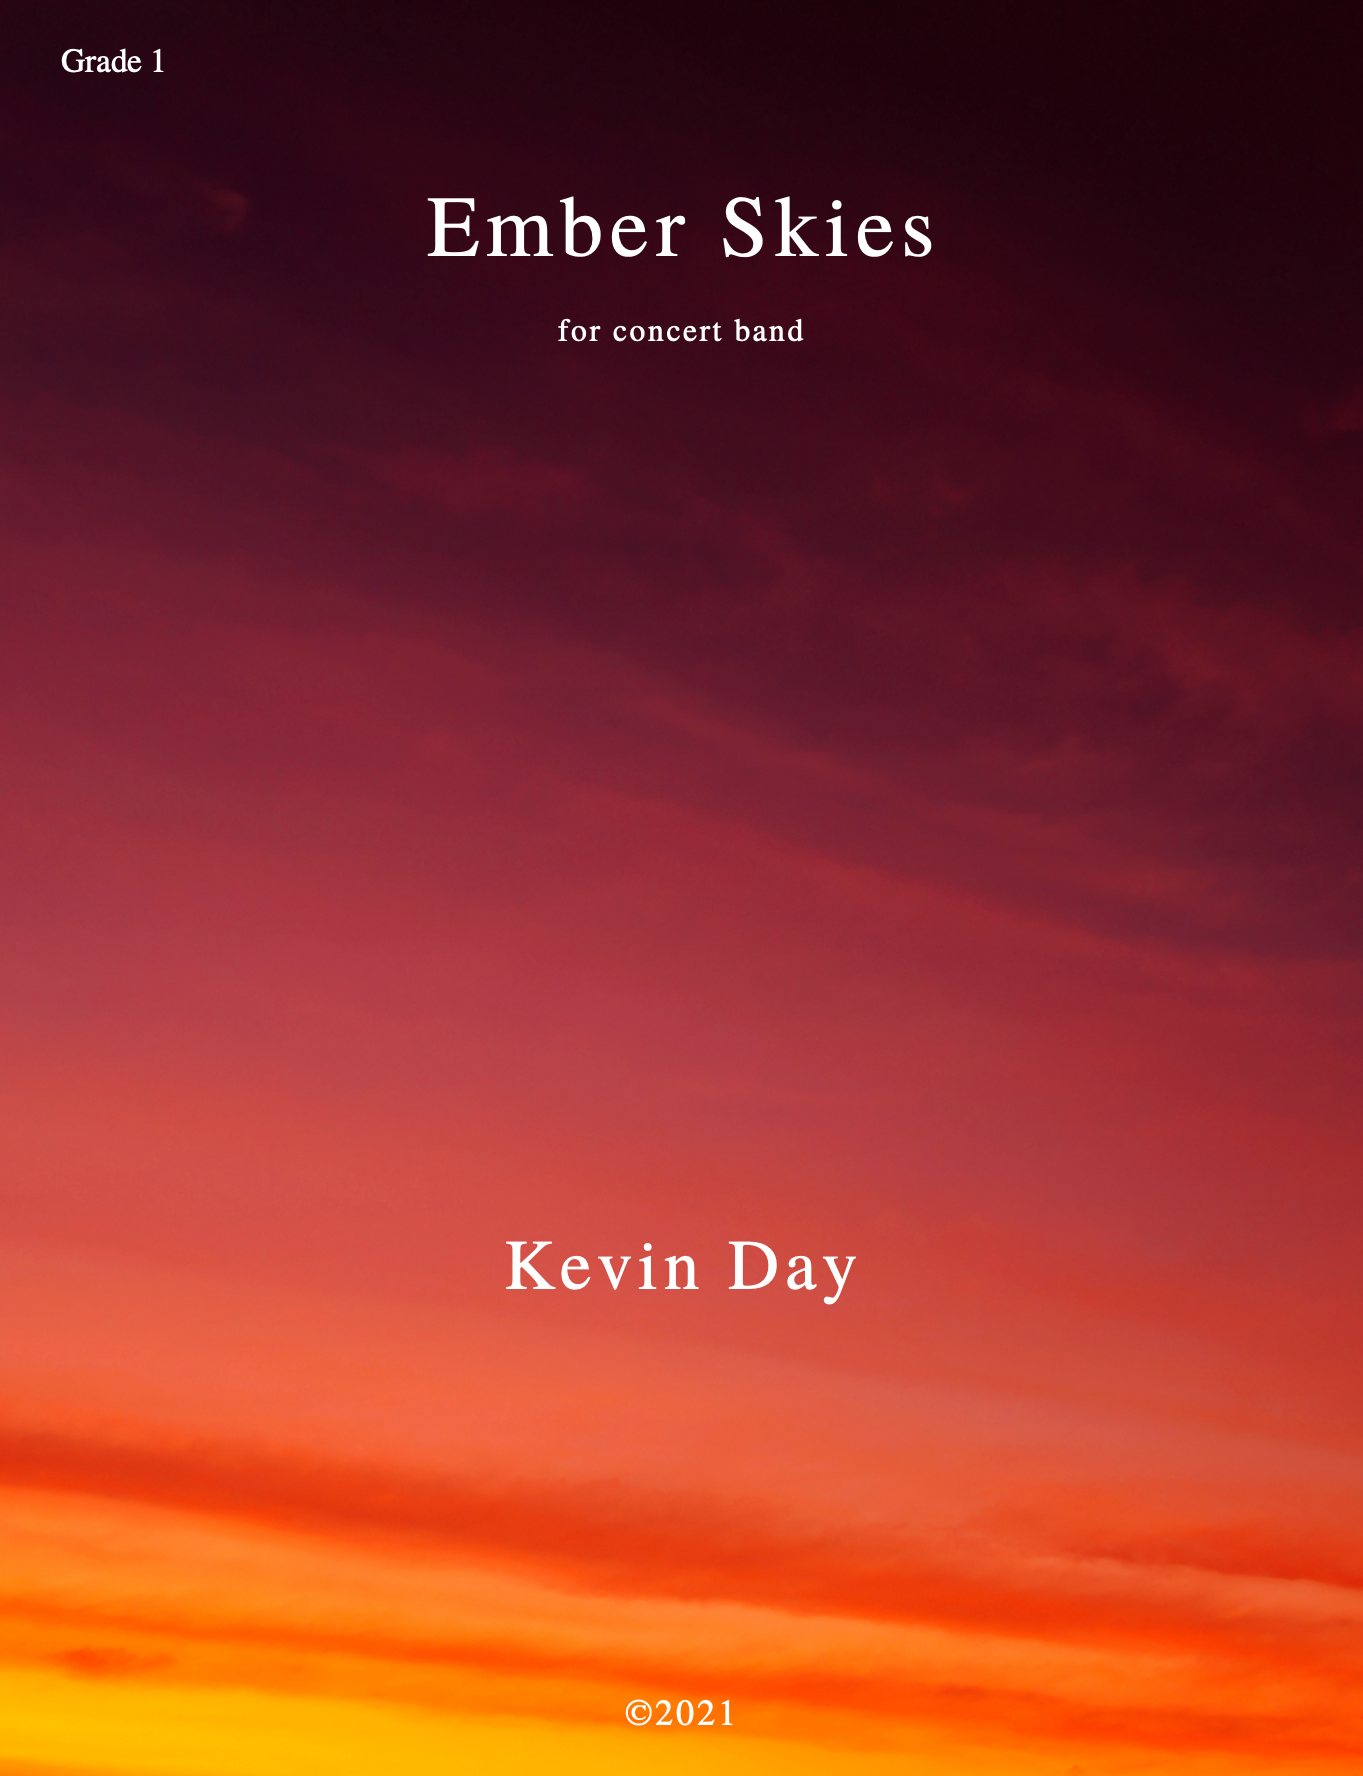 Ember Skies by Kevin Day